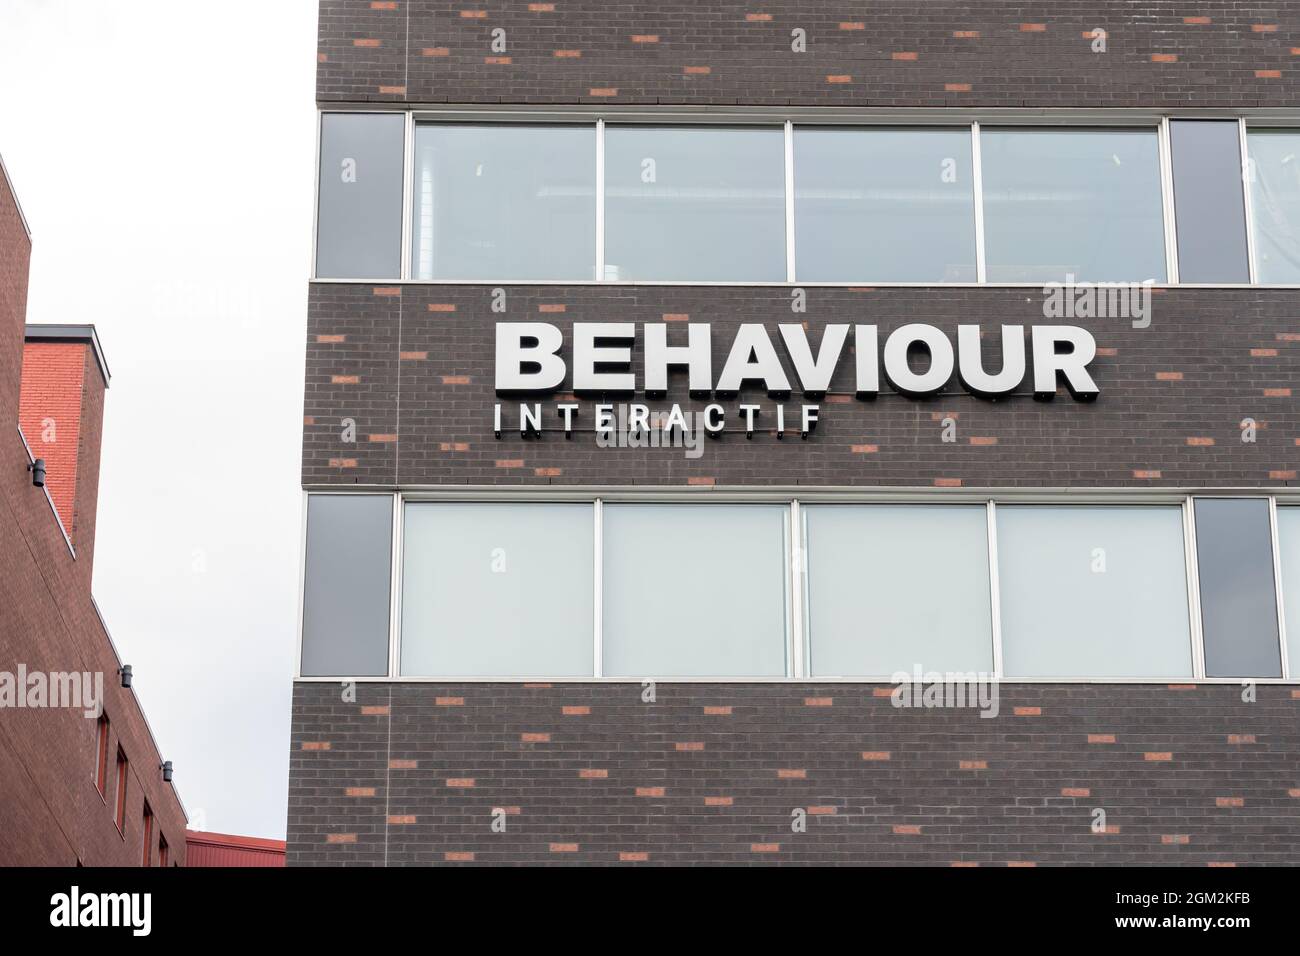 Montreal, Quebec, Canada - September 6, 2021: Behaviour Interactive sign at their headquarters in Montreal, Quebec, Canada. Stock Photo